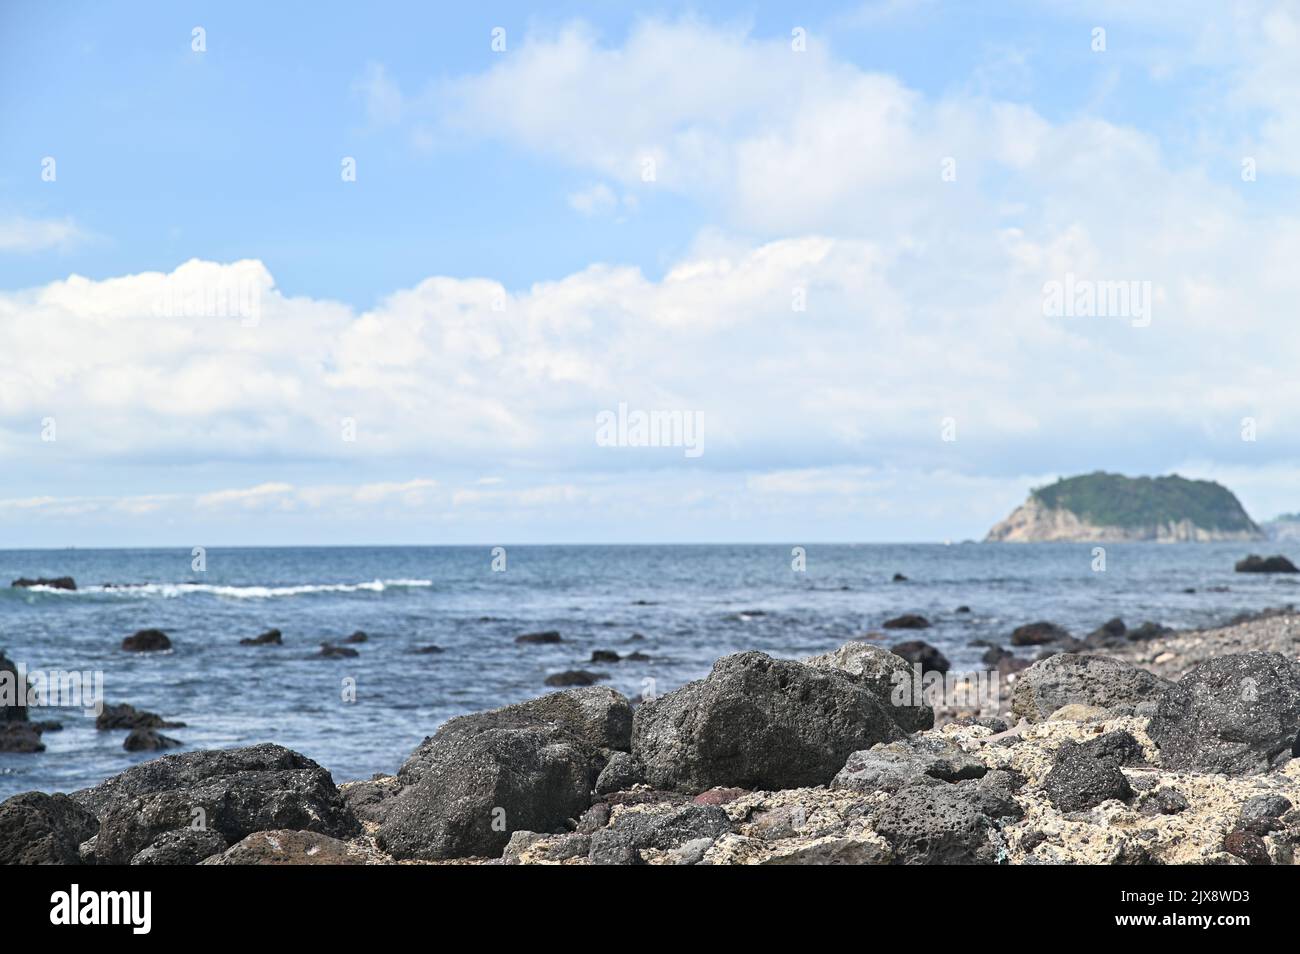 There are rocks and after that we can see the sea and island Stock Photo